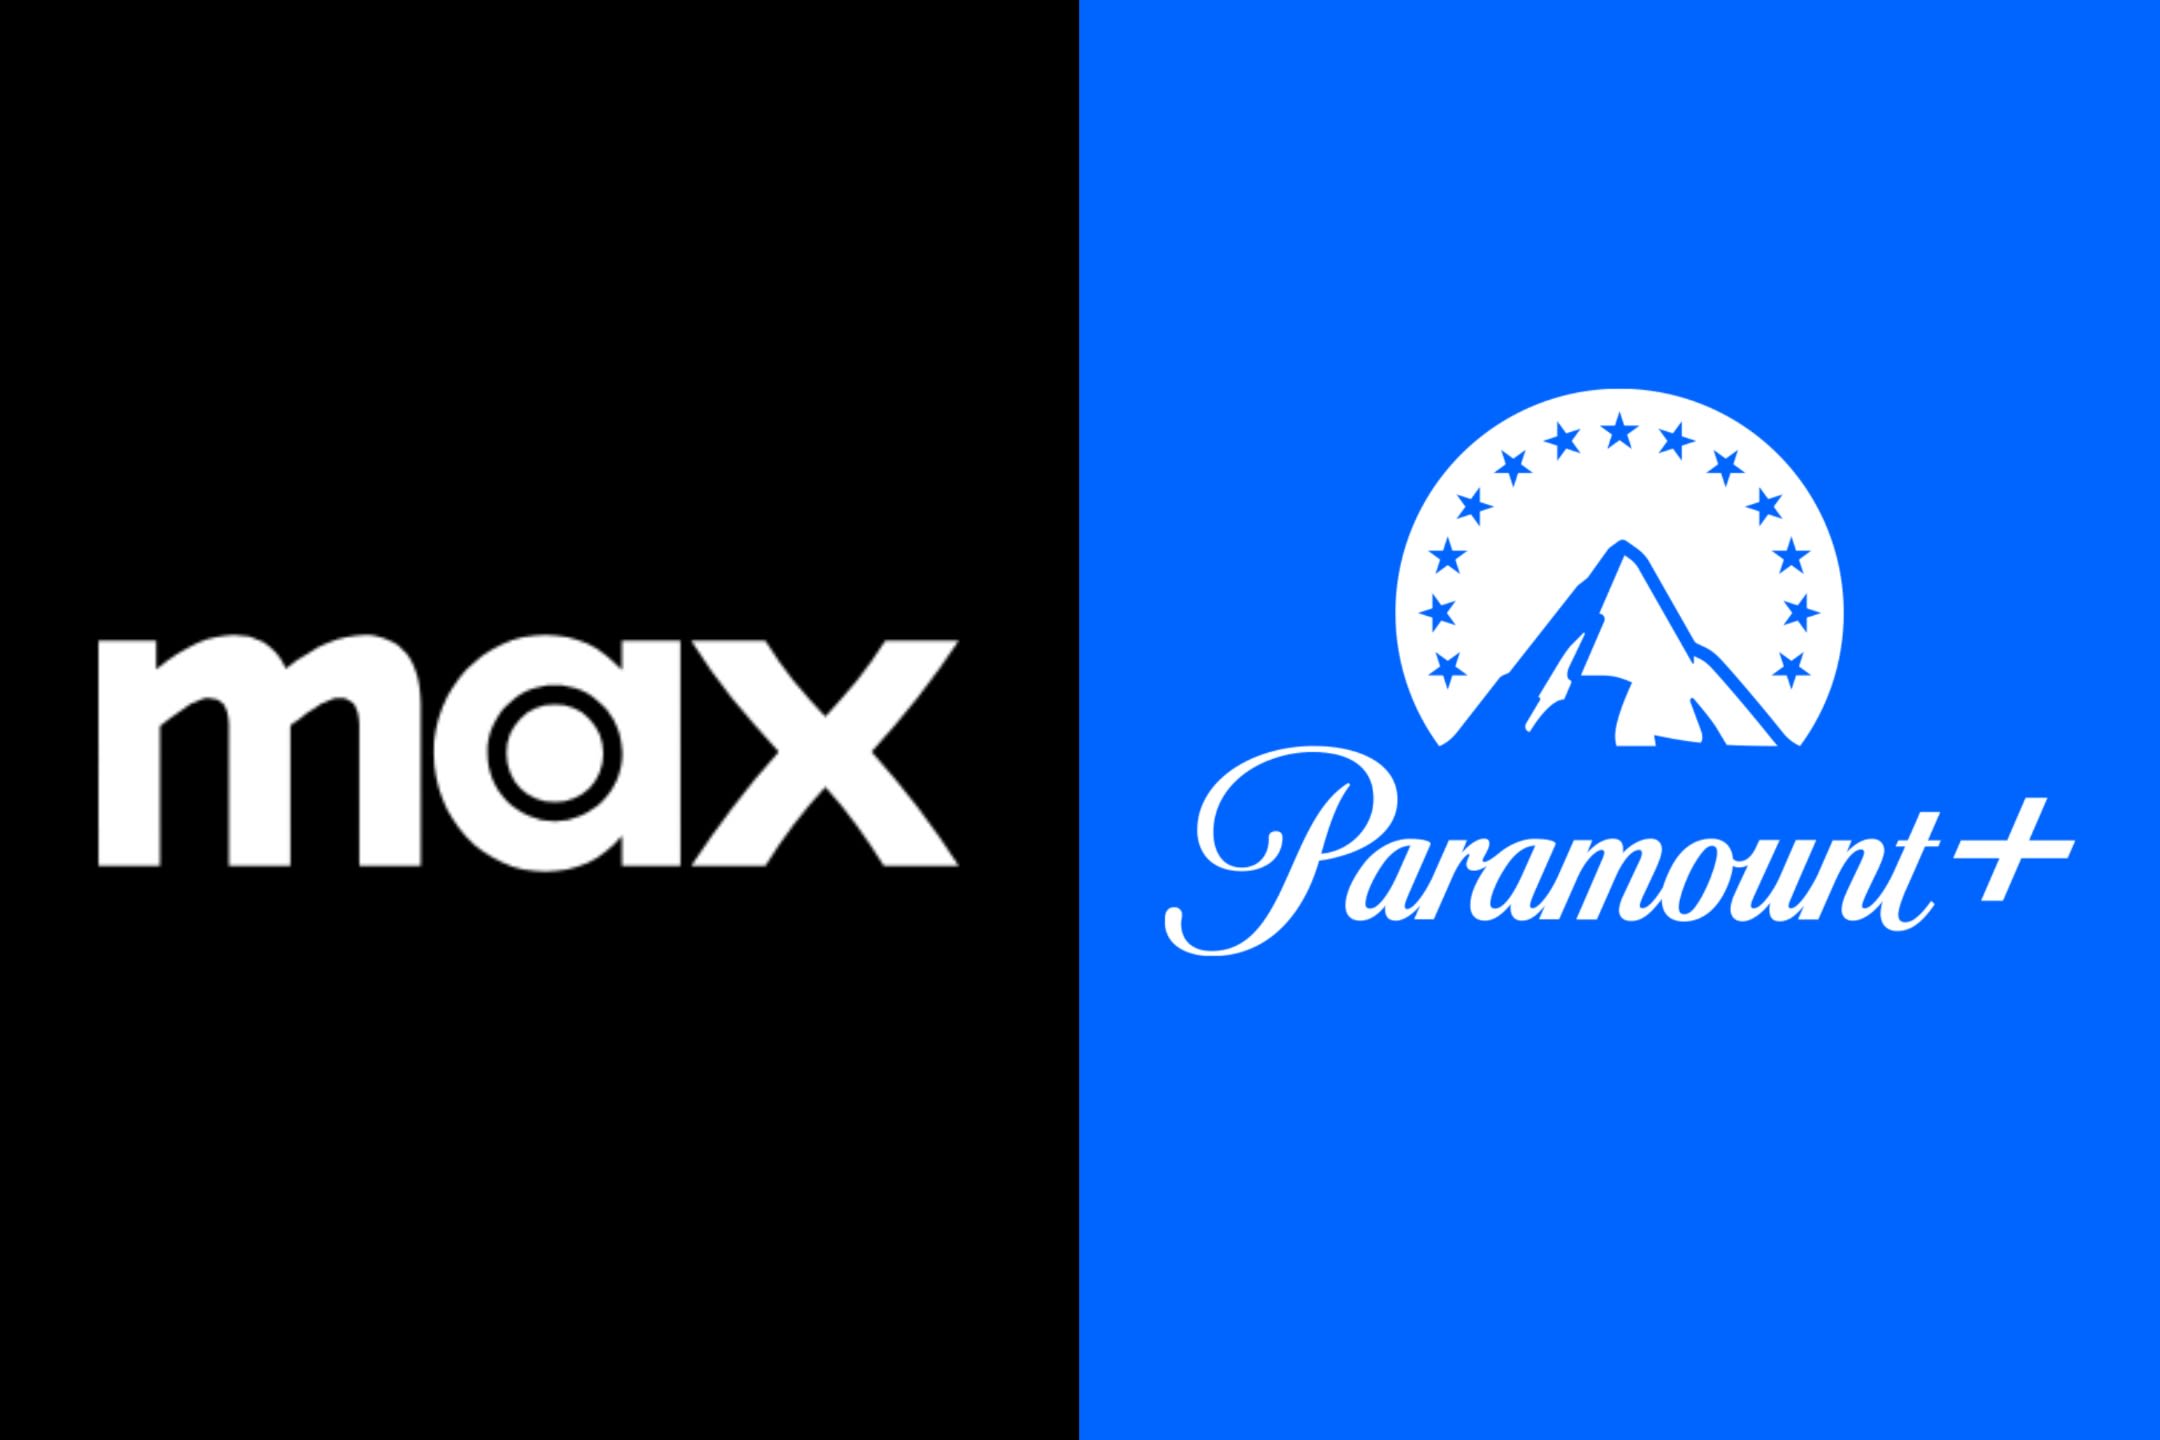 Could Max and Paramount+ Merge? Warner Bros. Discovery Open to Exploring Paramount Streaming Joint Venture